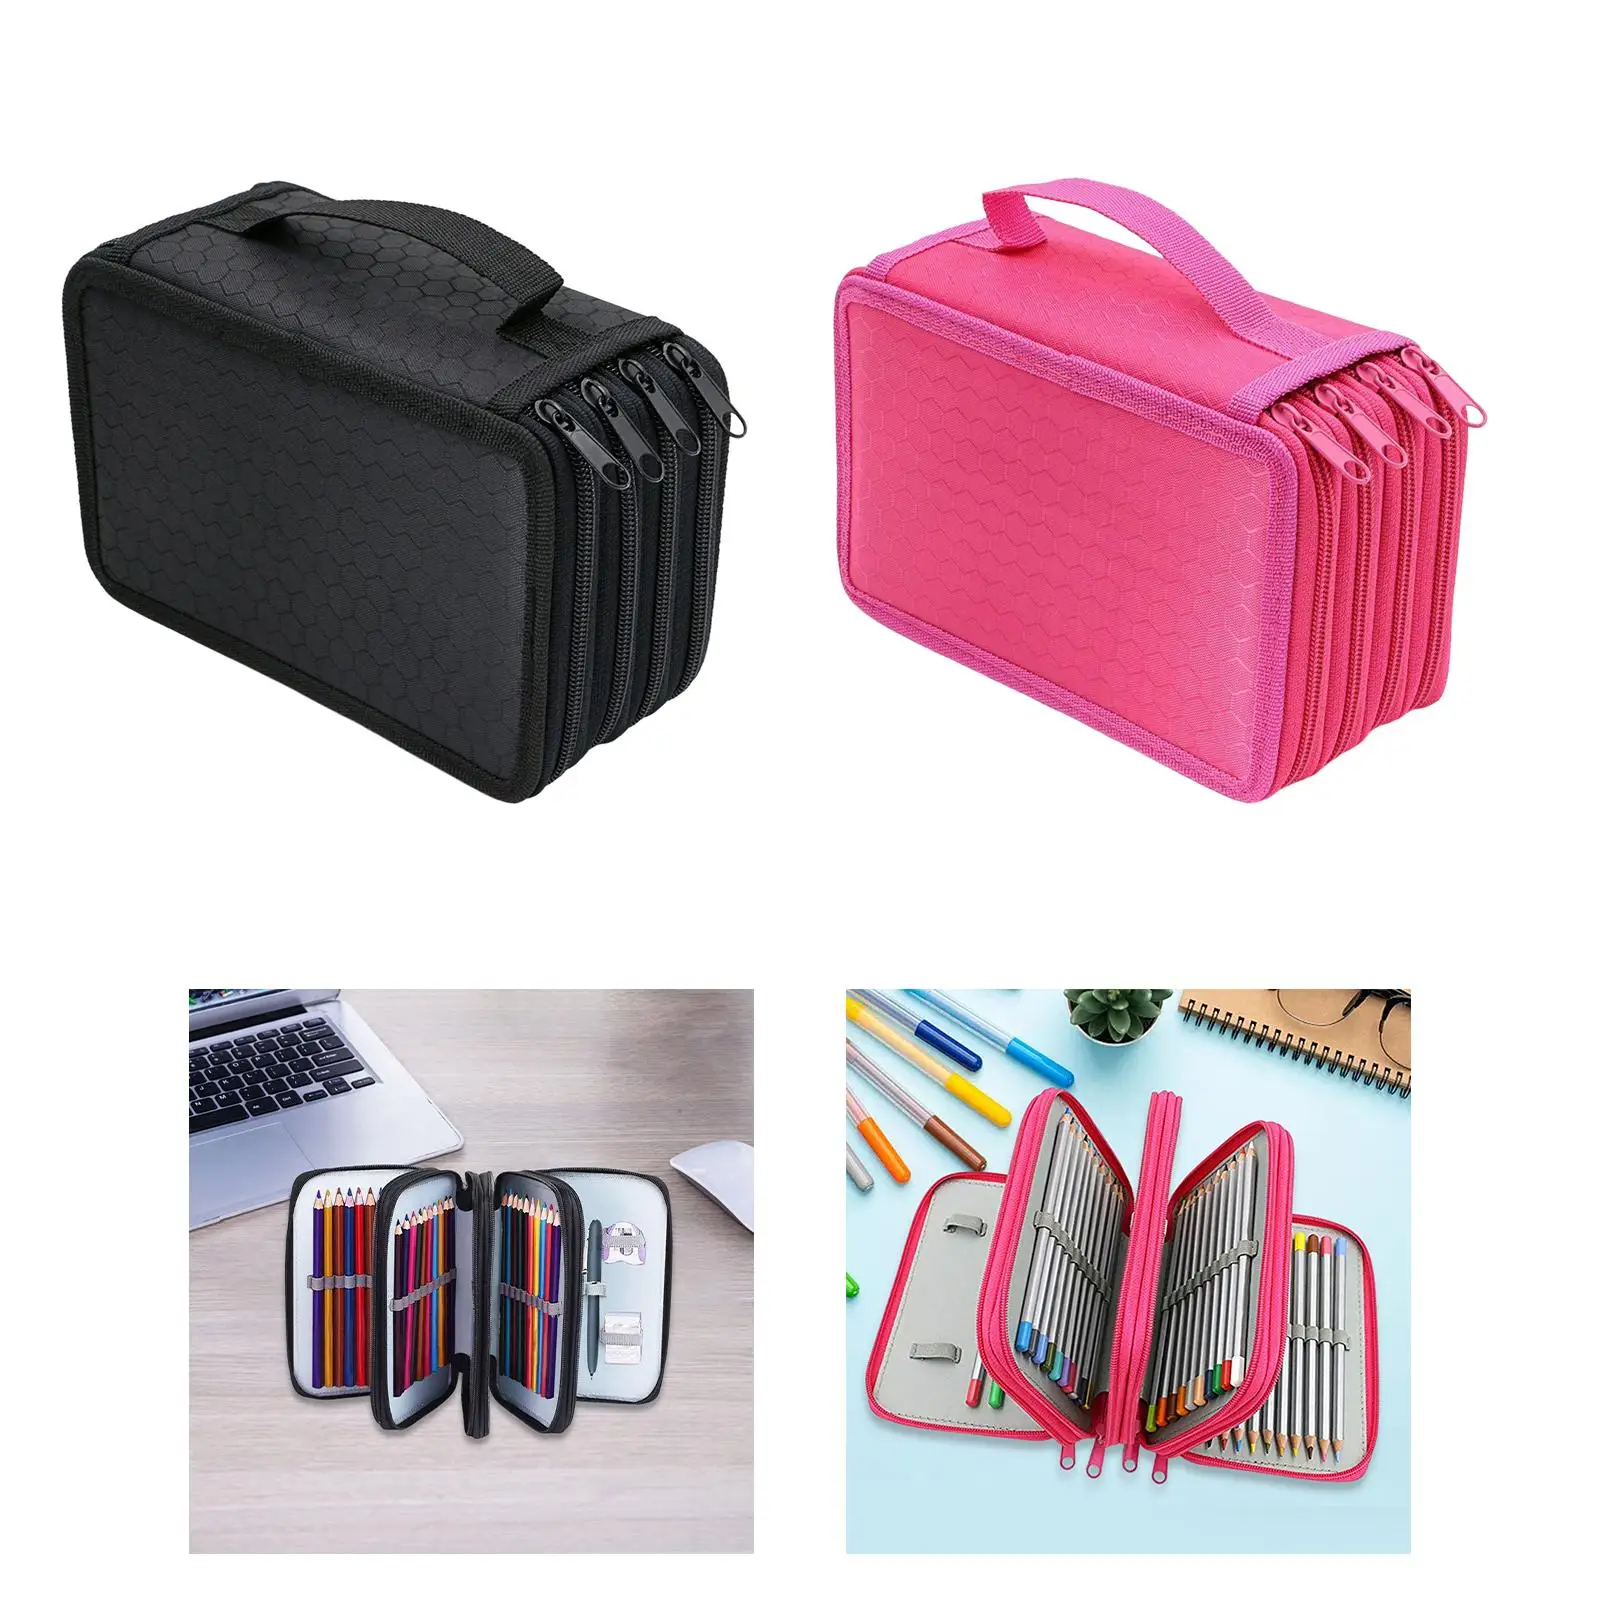 Pencil Case Storage Pen Bag Multifunction 72 Slots with Zipper with Handle Makeup Paint Bag for Adults Pens Markers Stationery